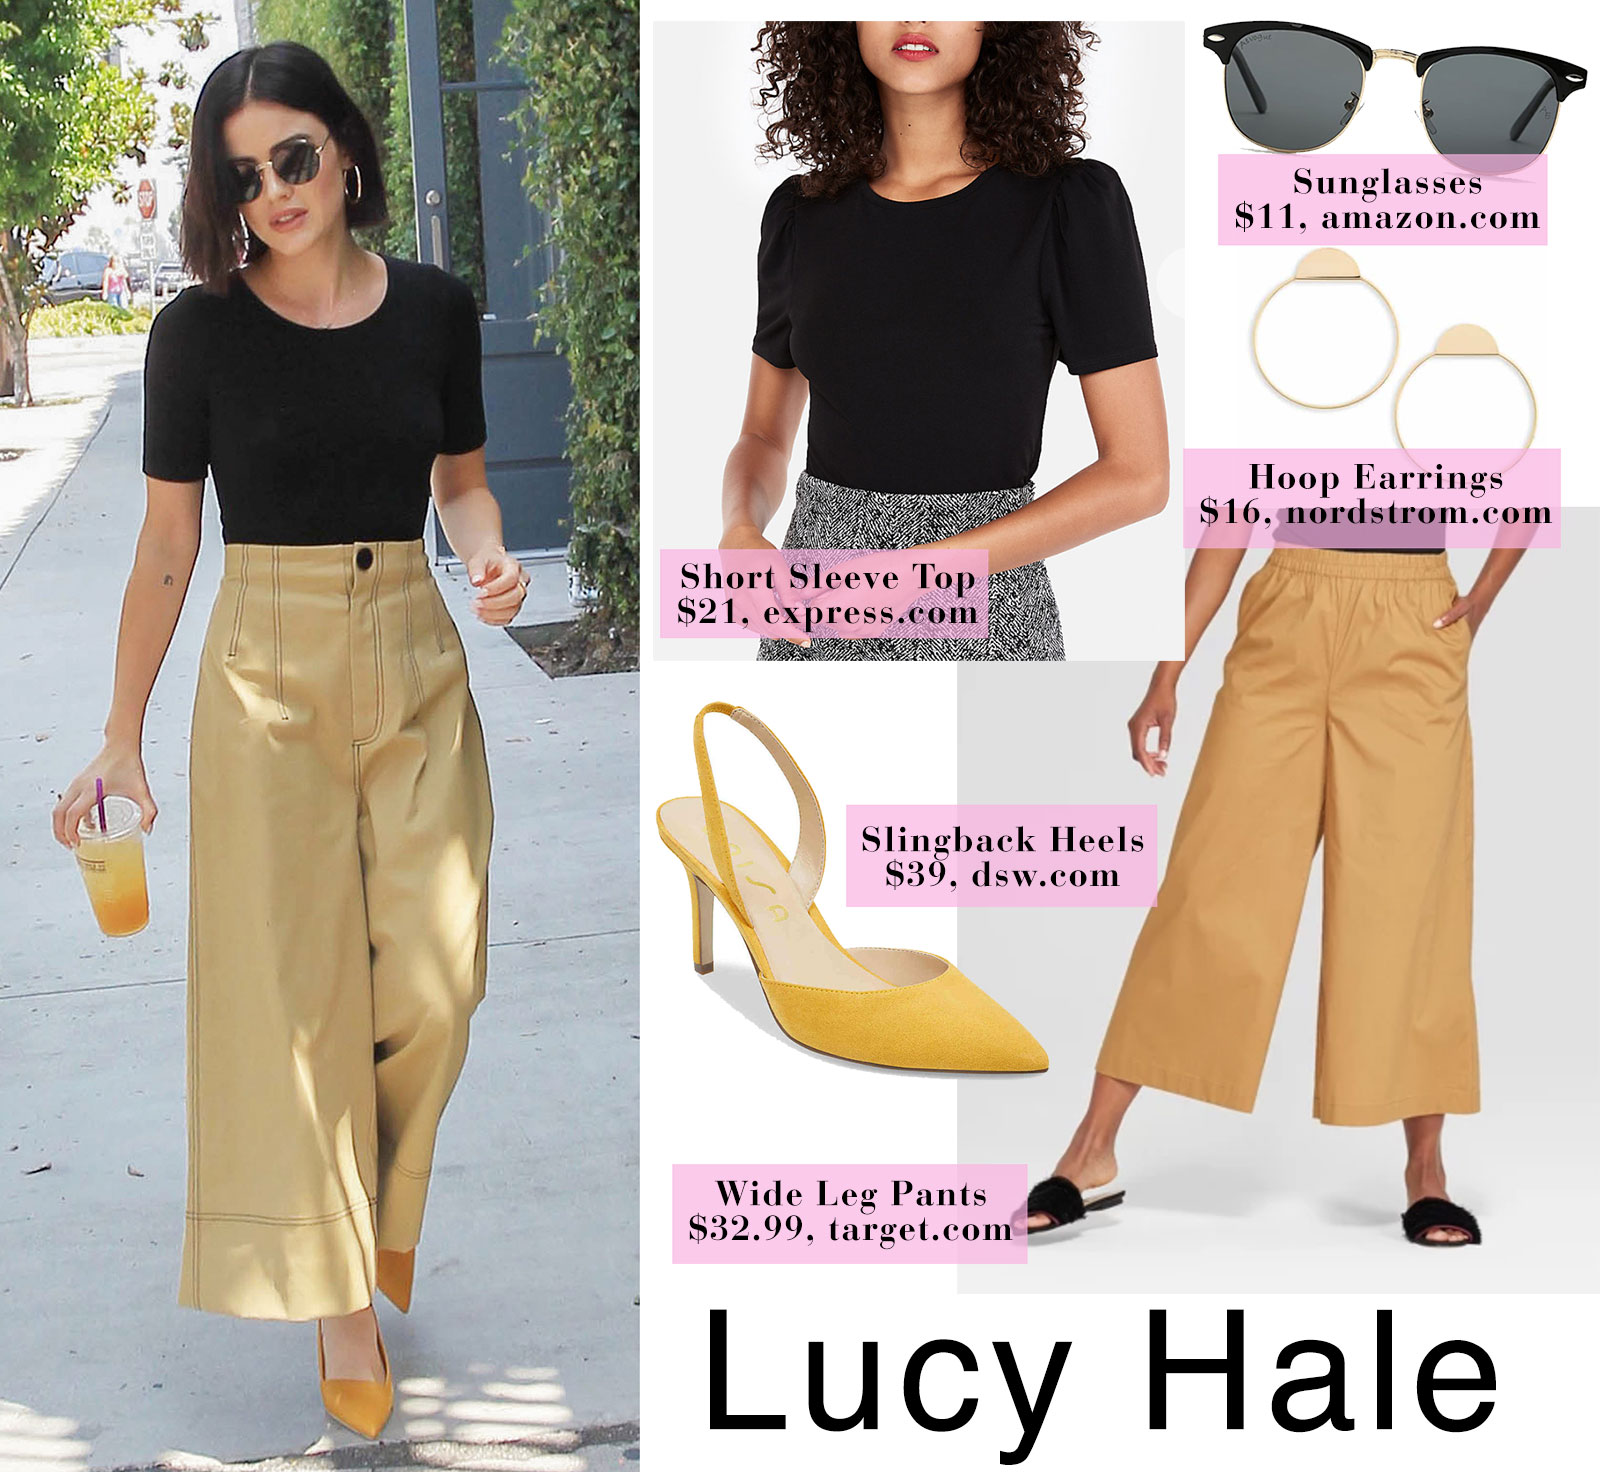 Lucy Hale look for less with wide leg crop pants from Target